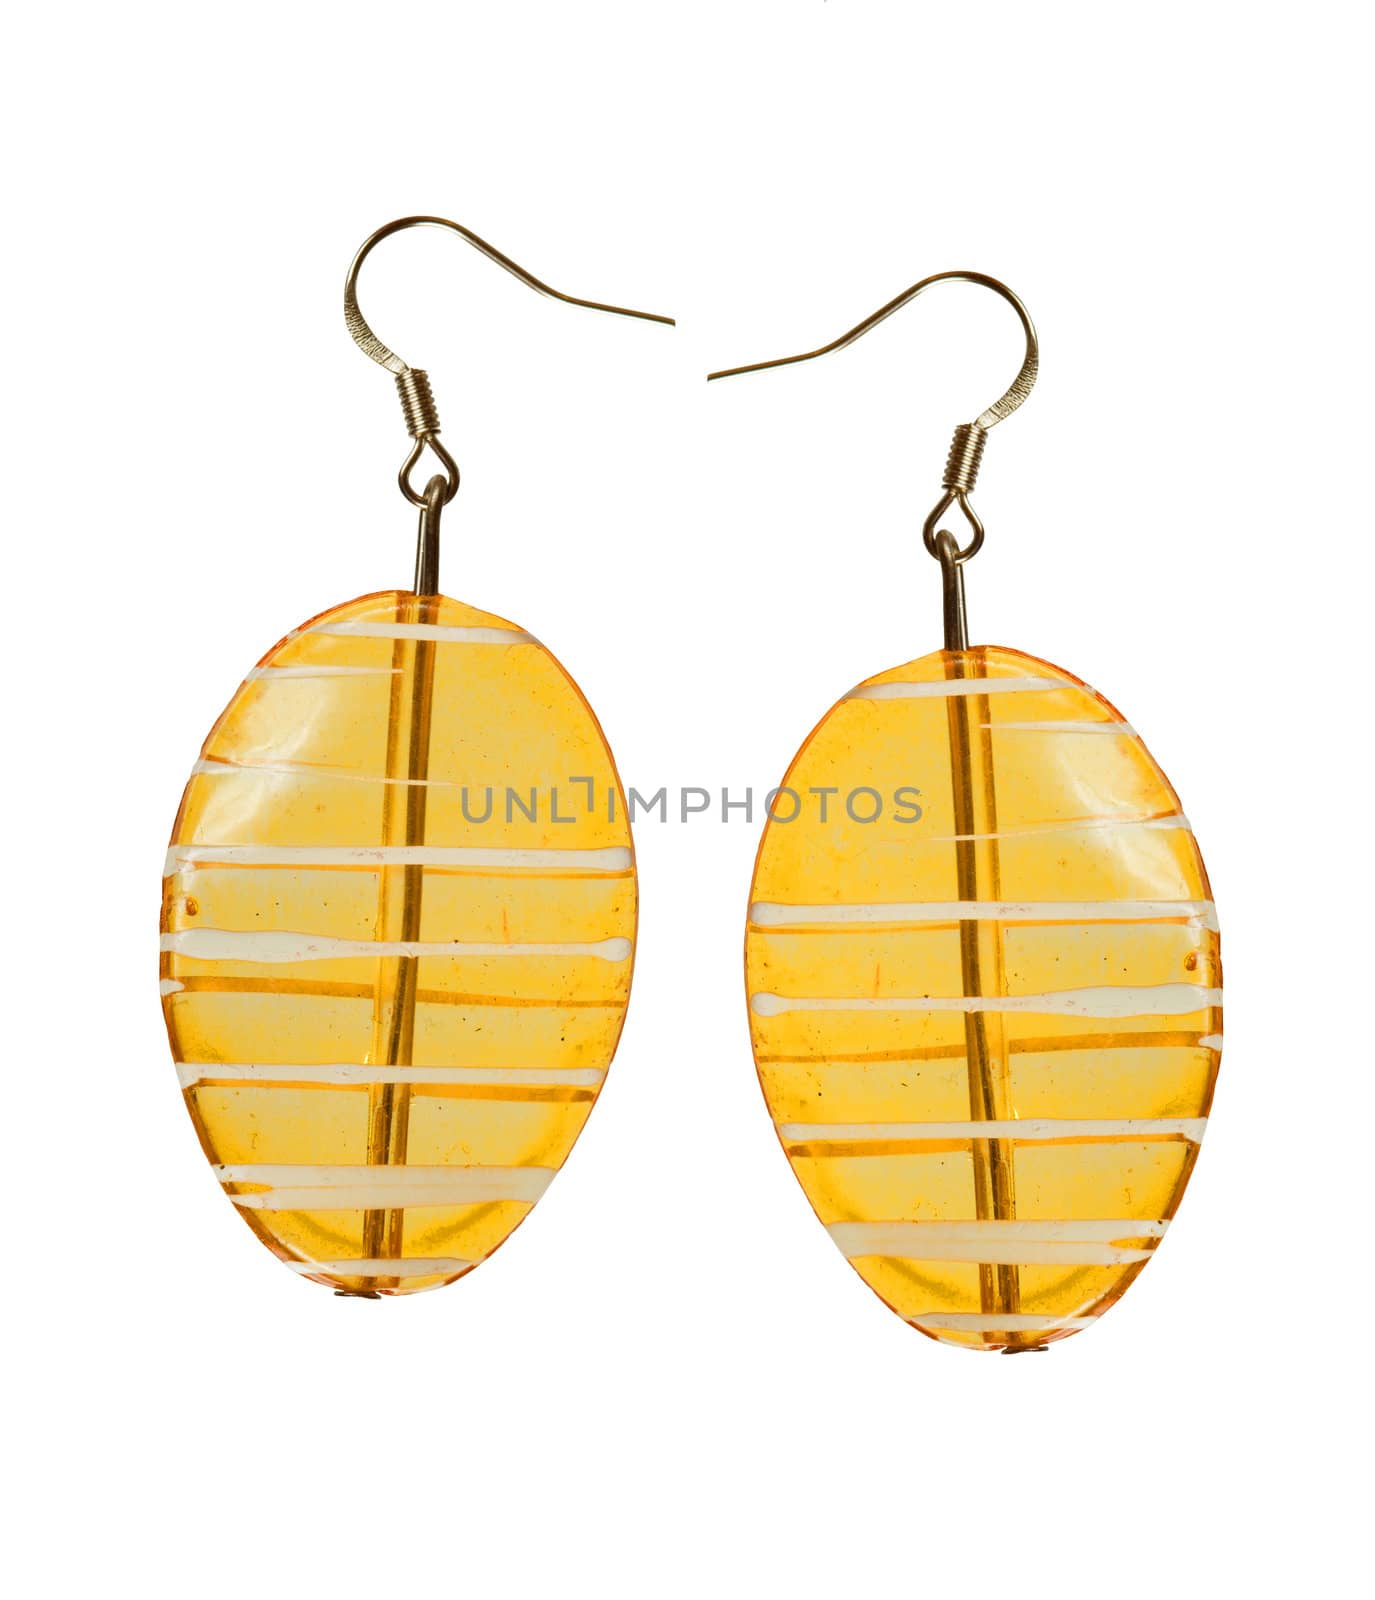 Earrings in yellow glass on a white background by AleksandrN